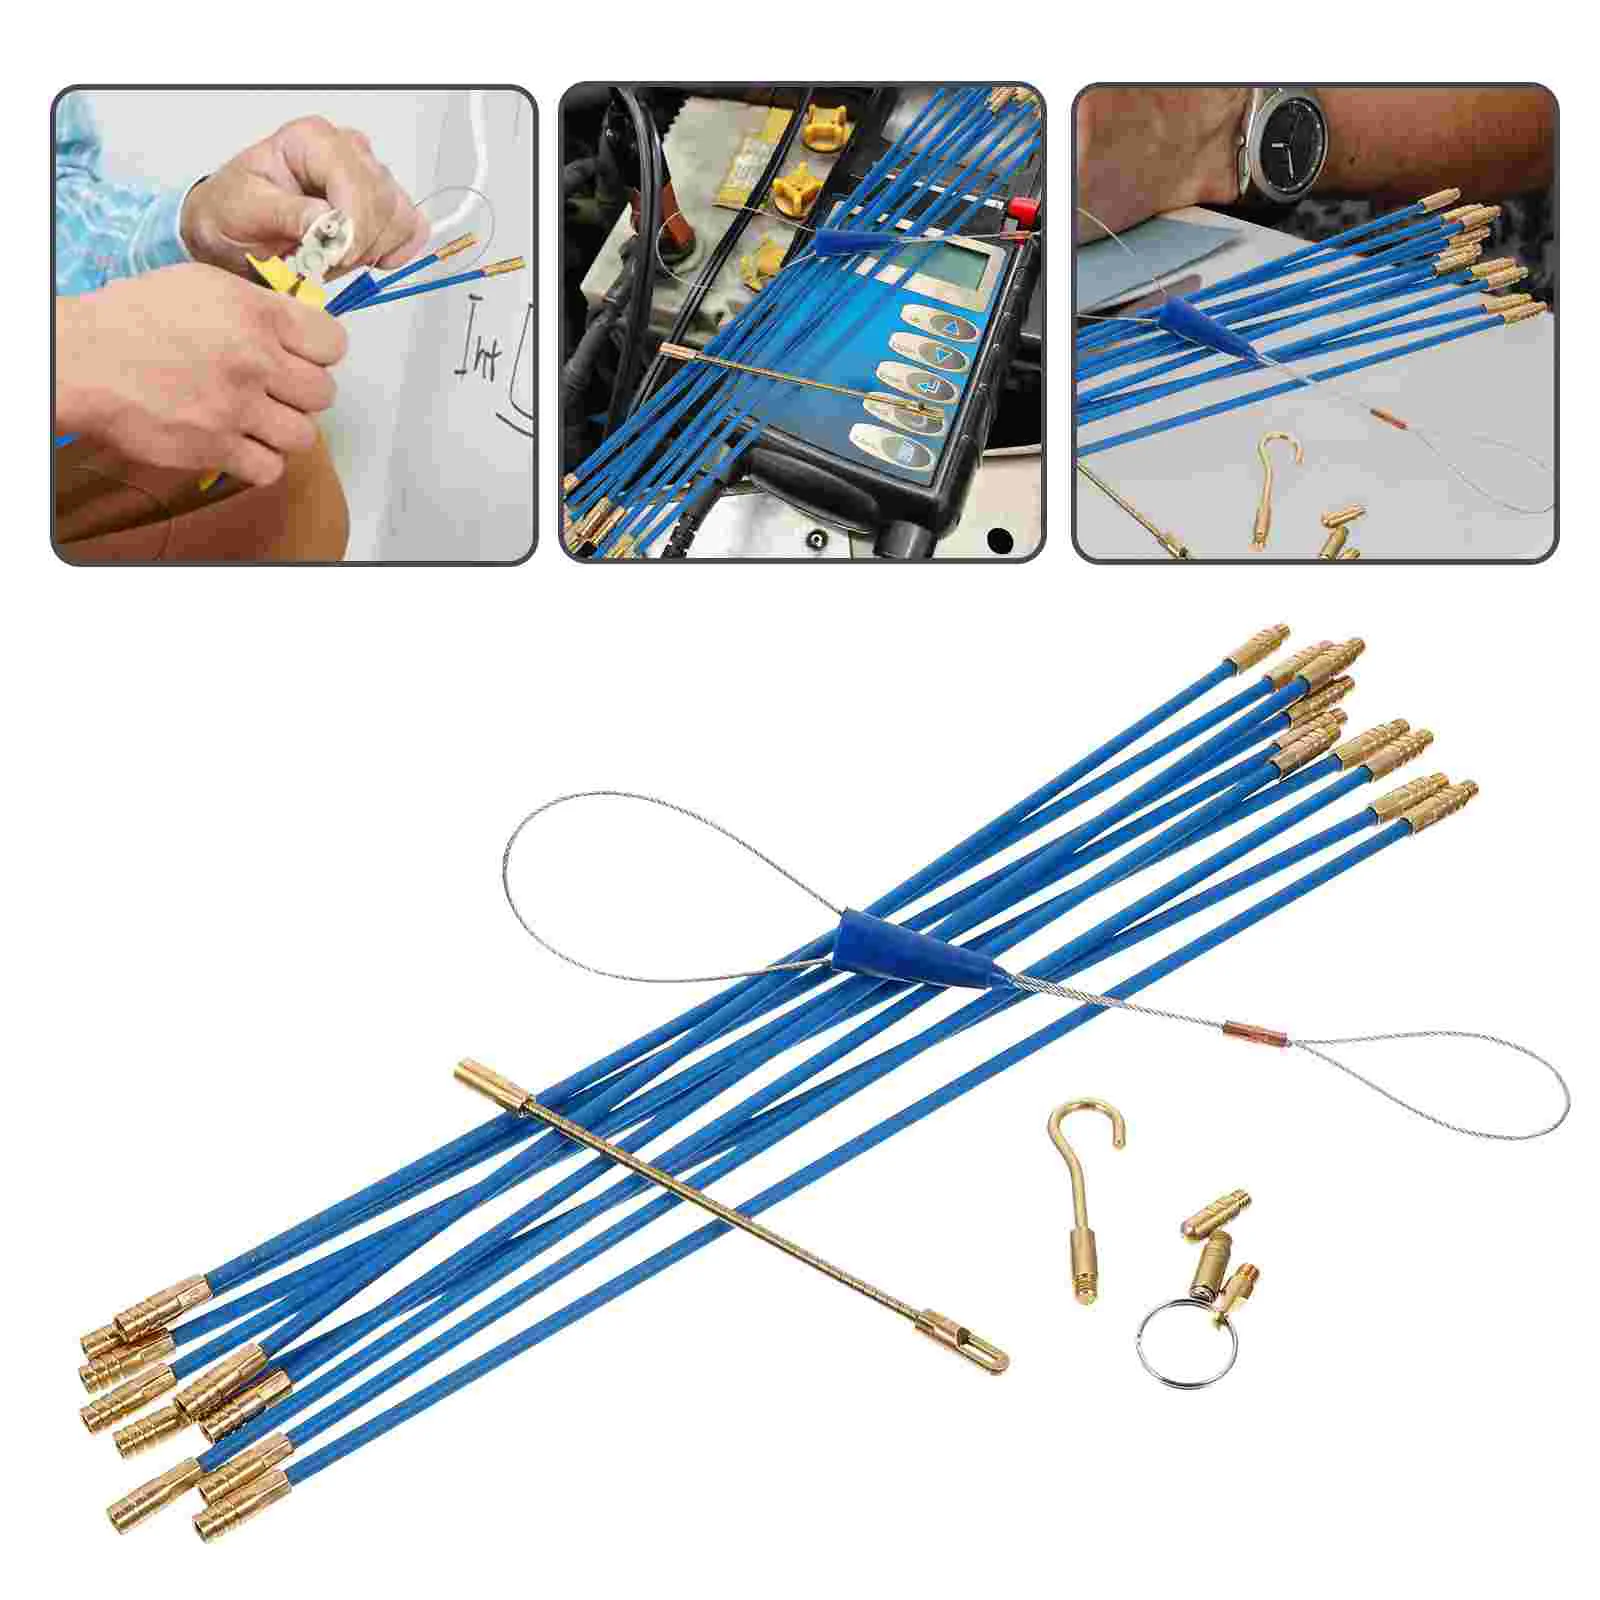 

Tape Wire Electrical Fiberglass Tools Kit Puller Cable Pullers Rod Cables Rods Connectable Coaxial Running Glow Electrician